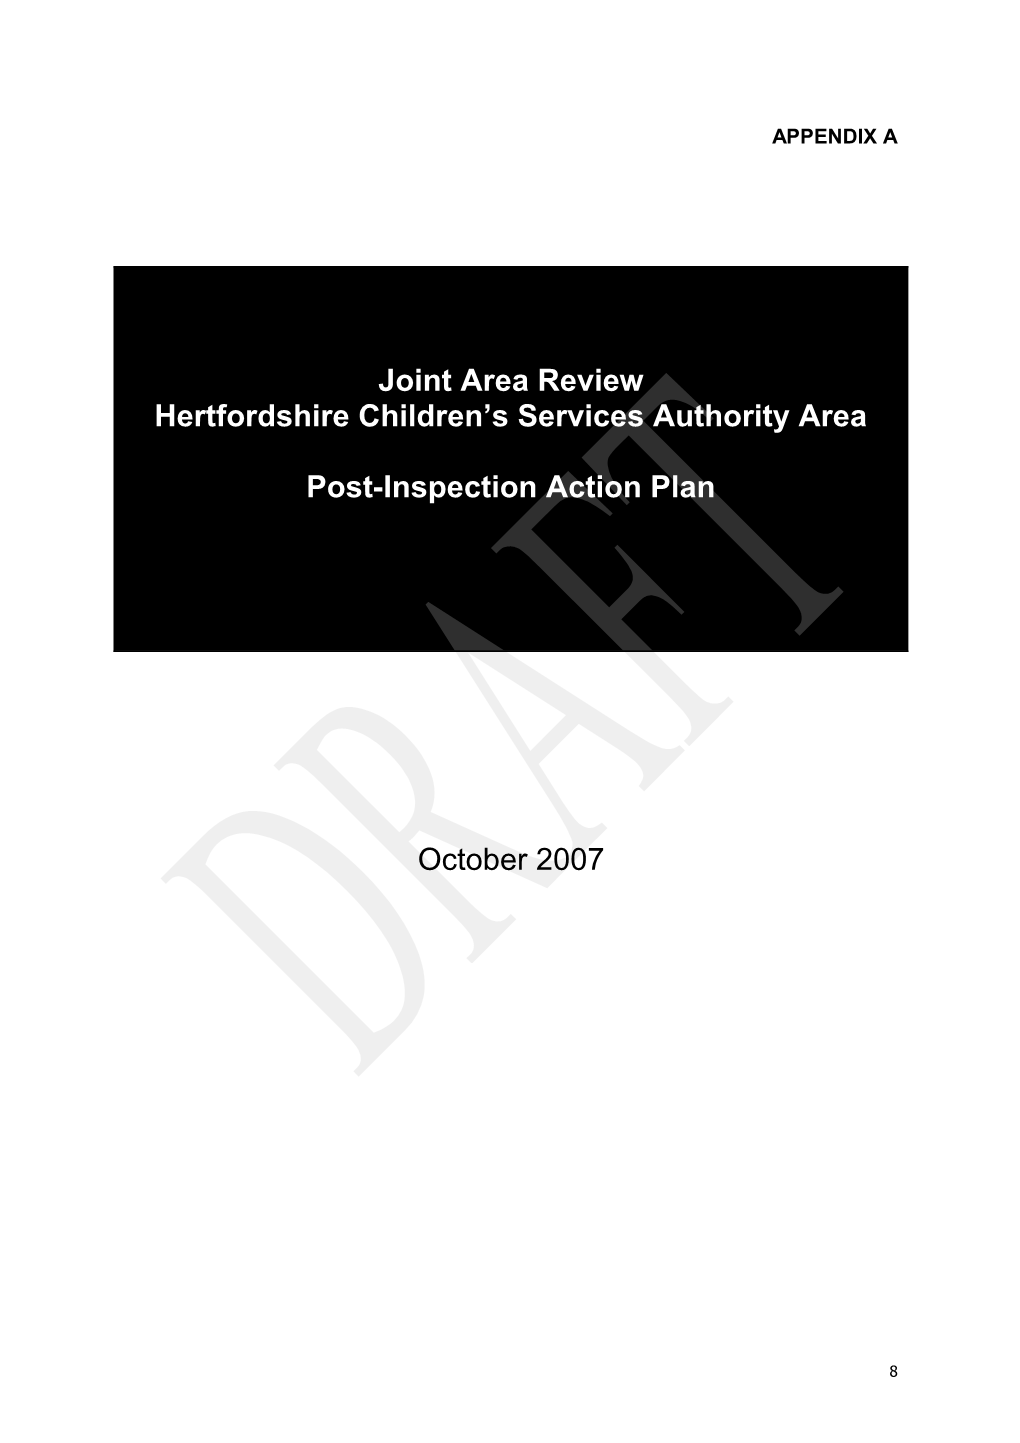 1.1The Joint Area Review Describes the Outcomes Achieved by Children and Young People Growing